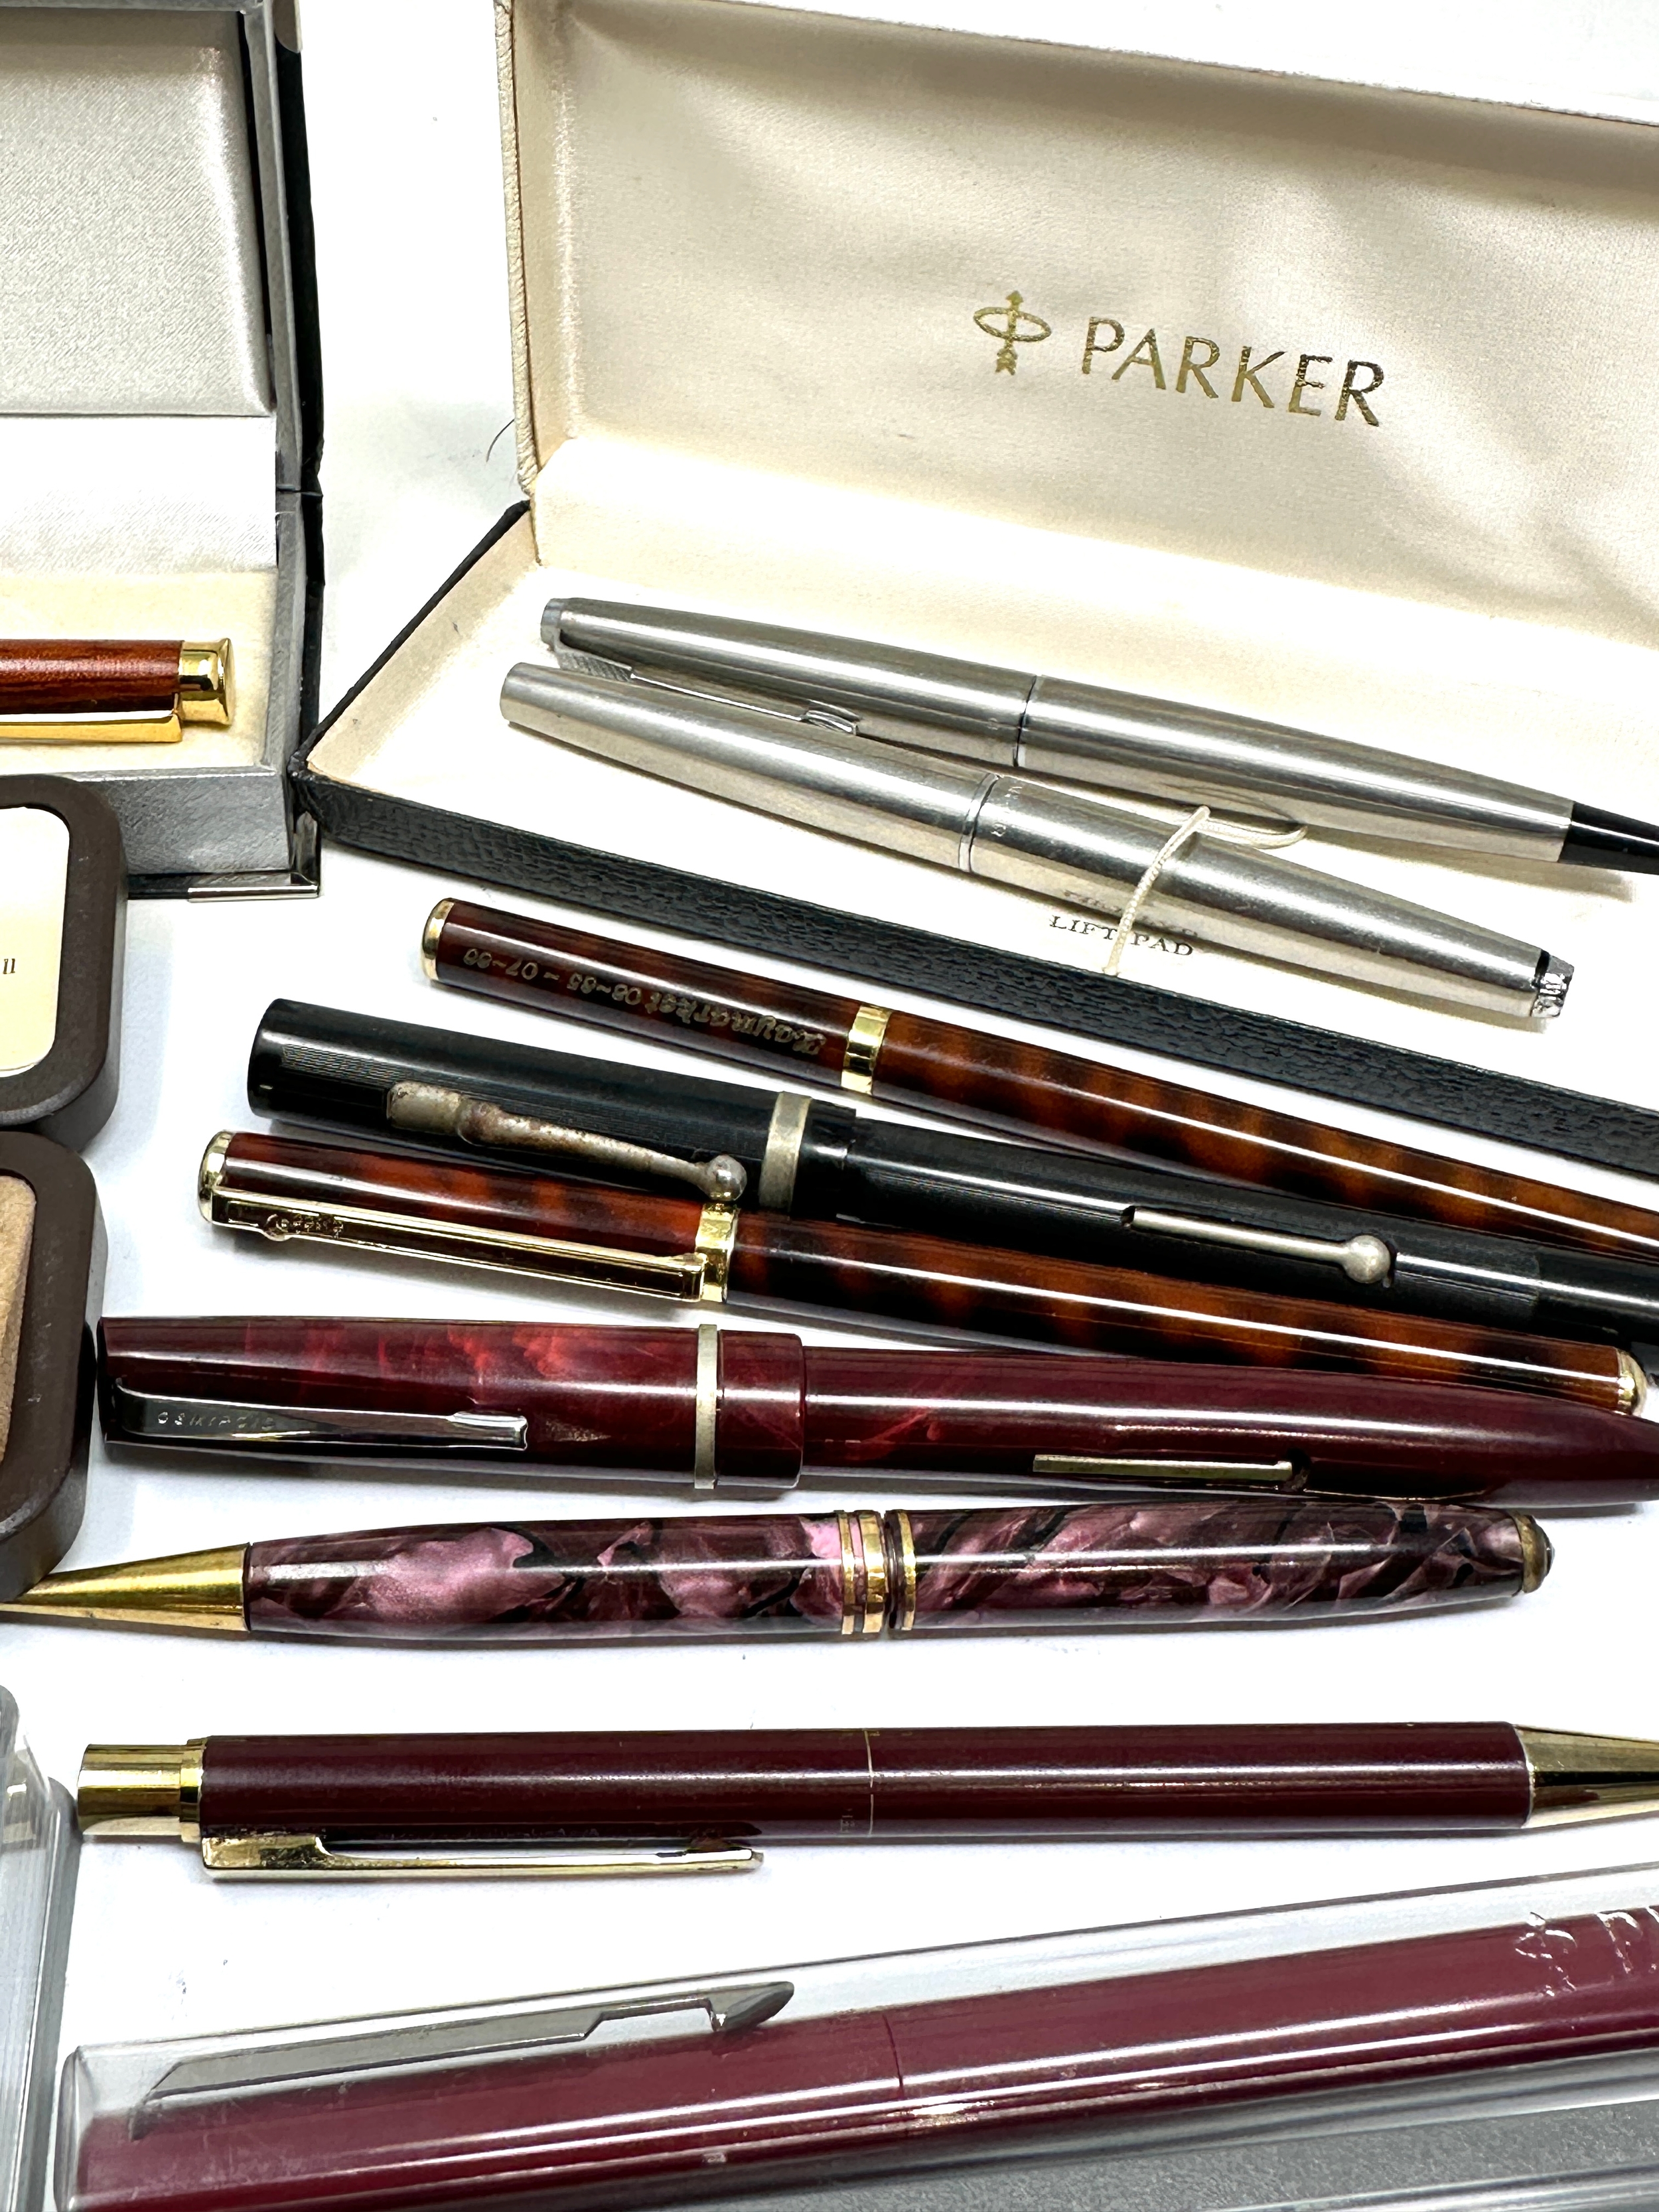 Selection of pens includes parker etc - Image 4 of 4